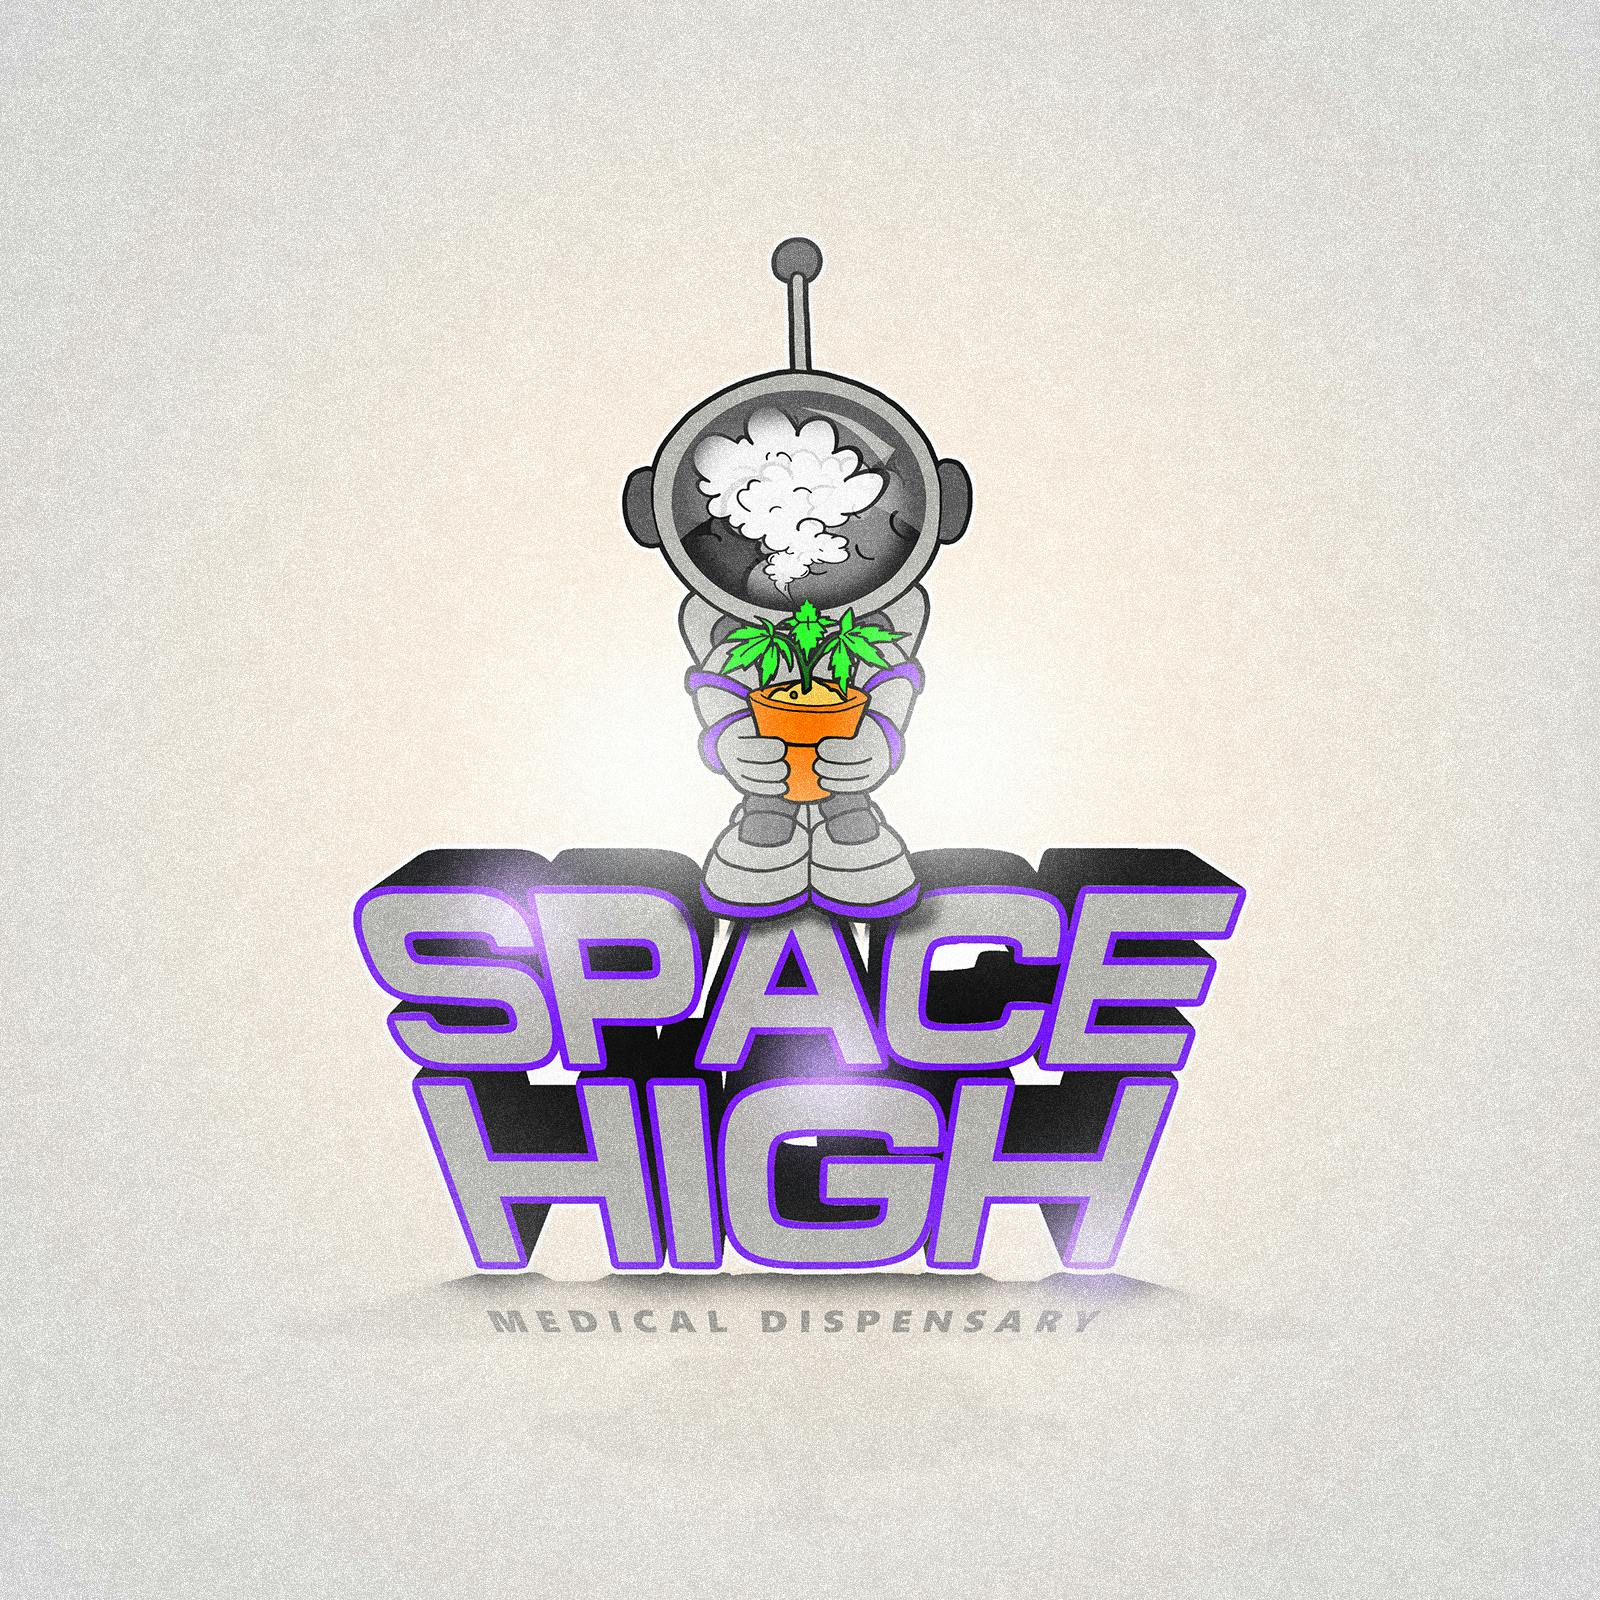 Space High Medical Dispensary